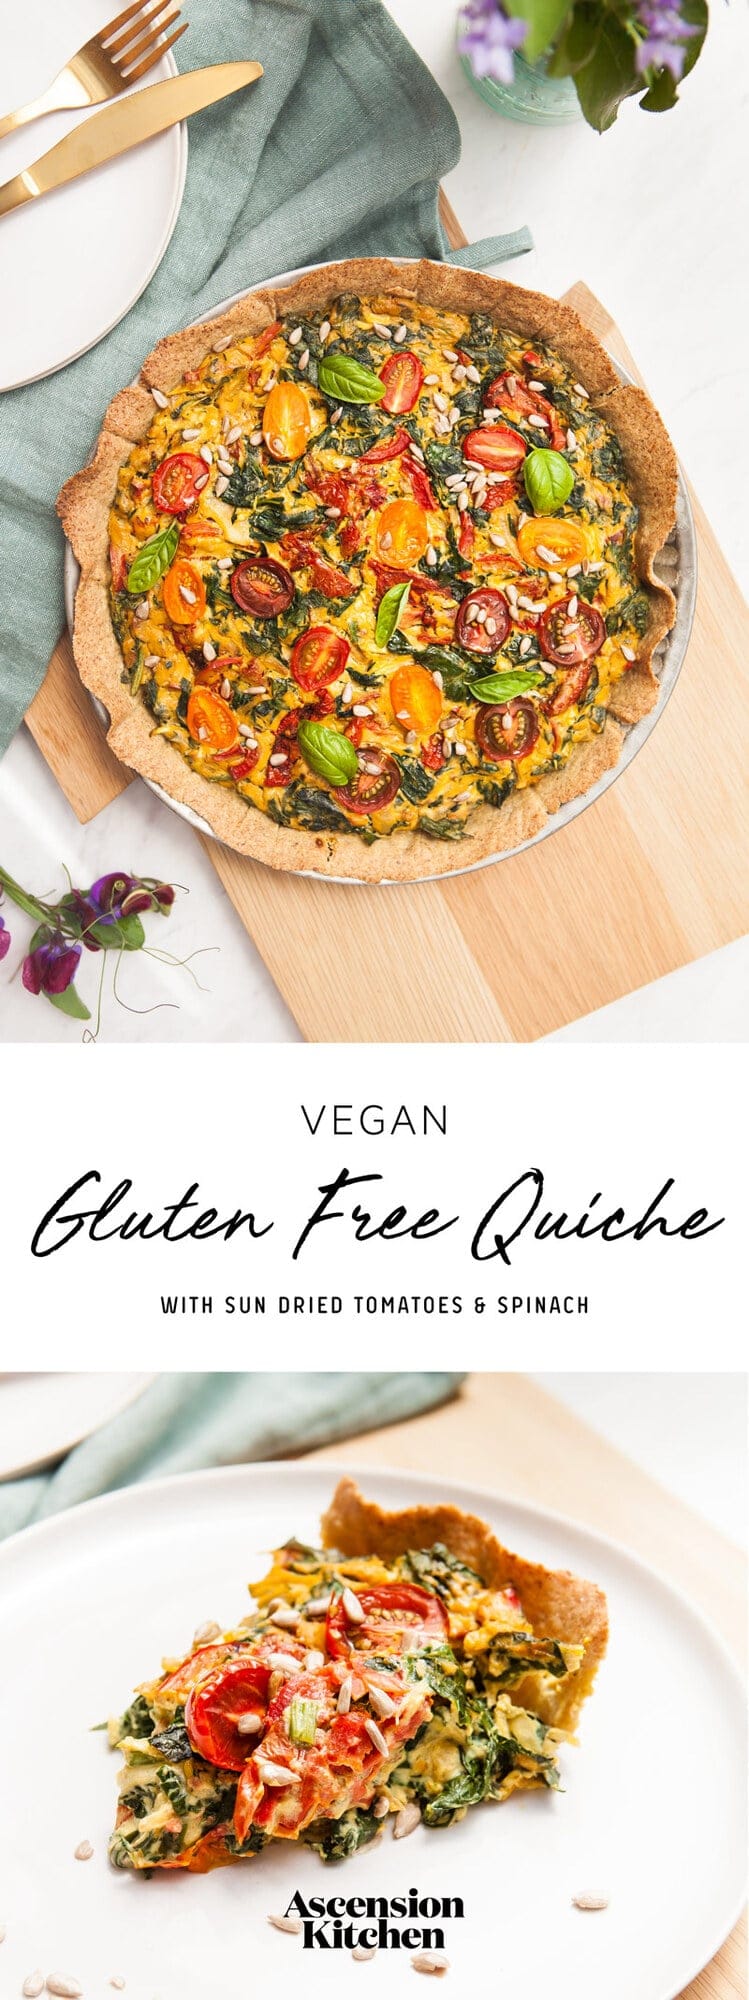 Vegan and Gluten Free Quiche with Sun Dried Tomatoes and Spinach. Perfect for summer picnics. #veganquiche #veganquicherecipes #veganquichecrust #veganquicheglutenfree #glutenfreequiche #glutenfreequiche #glutenfreequicherecipes #glutenfreequichevegetarian #glutenfreequichevegan #glutenfreequichespinach #glutenfreequichehealthy #glutenfreequichelorraine #AscensionKitchen // Pin to your own inspiration board! //